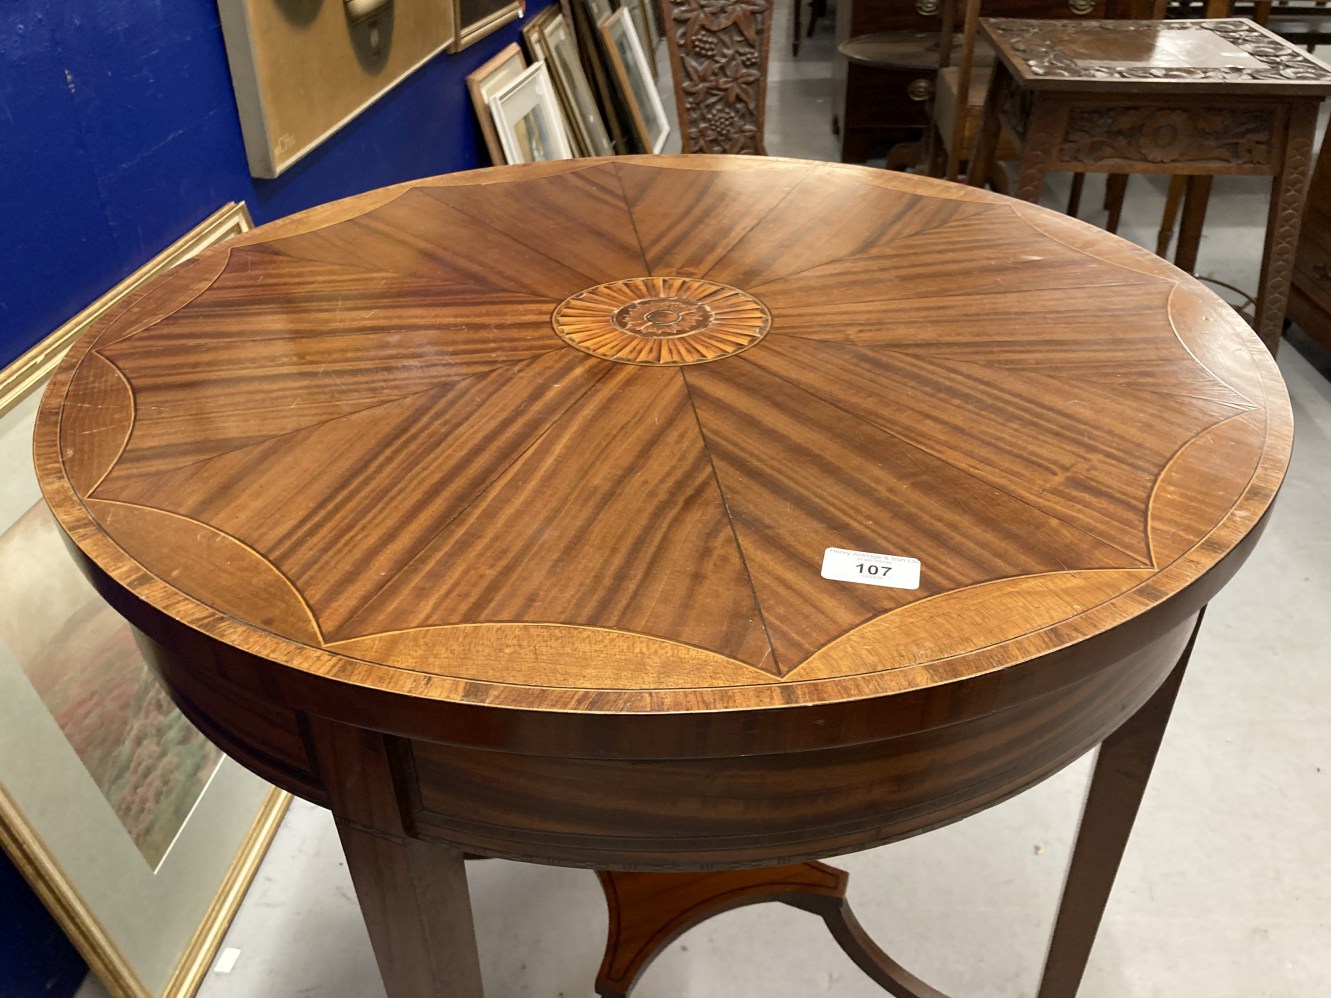 Early 20th cent. Edwardian Regency Revival occasional table of circular form inlaid with geometric - Image 2 of 3